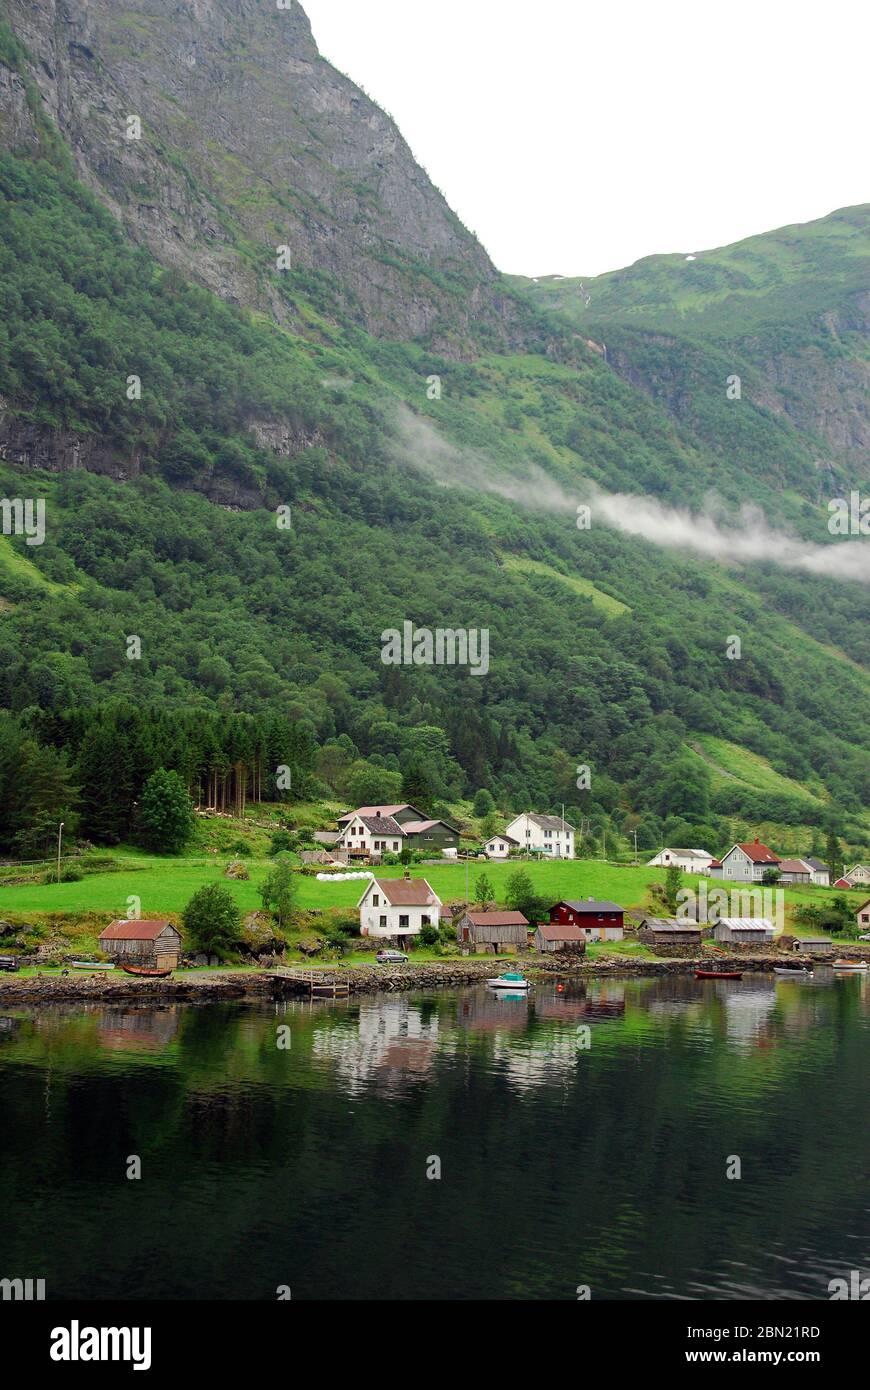 Norway, Sognefjord (or Sognefjorden) fjord 01 Stock Photo